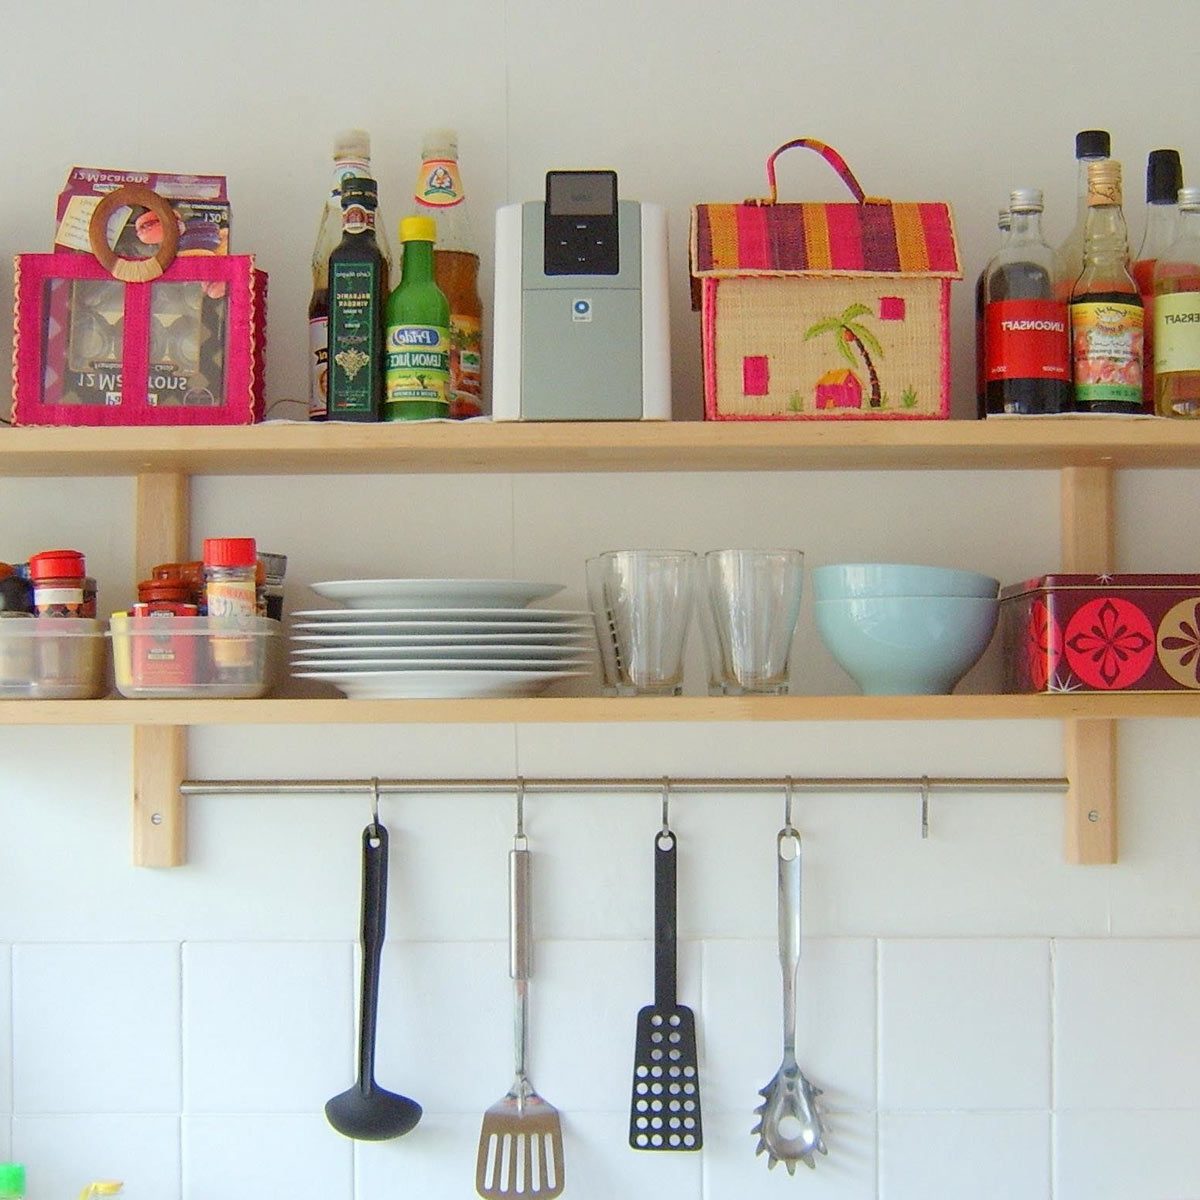 15 DIY Ideas for Snack Storage - WooHome